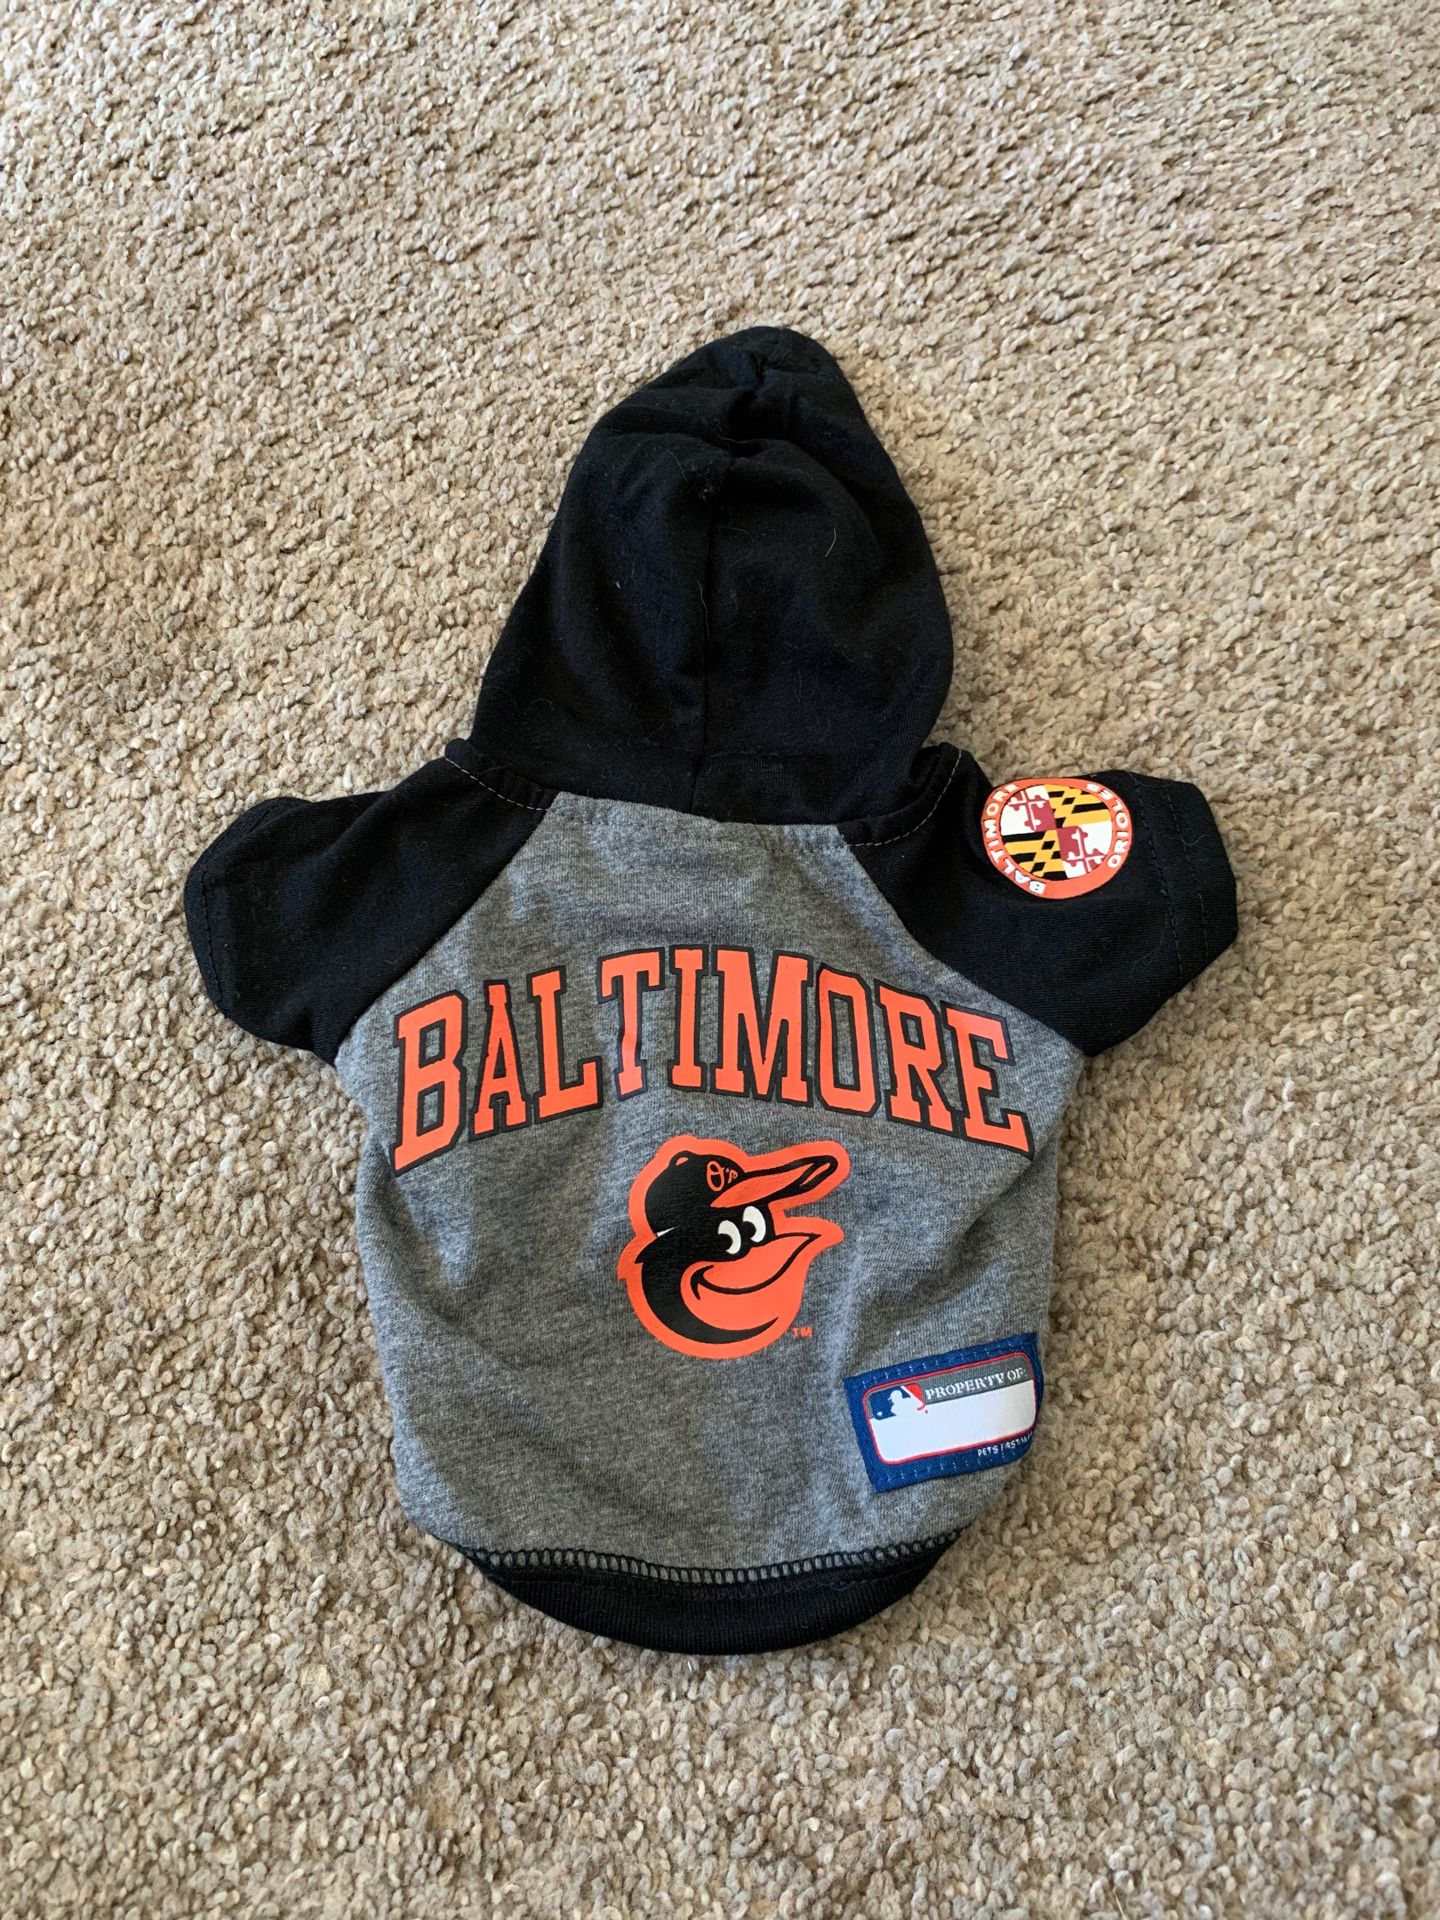 Baltimore Orioles shirt for dog - size XS